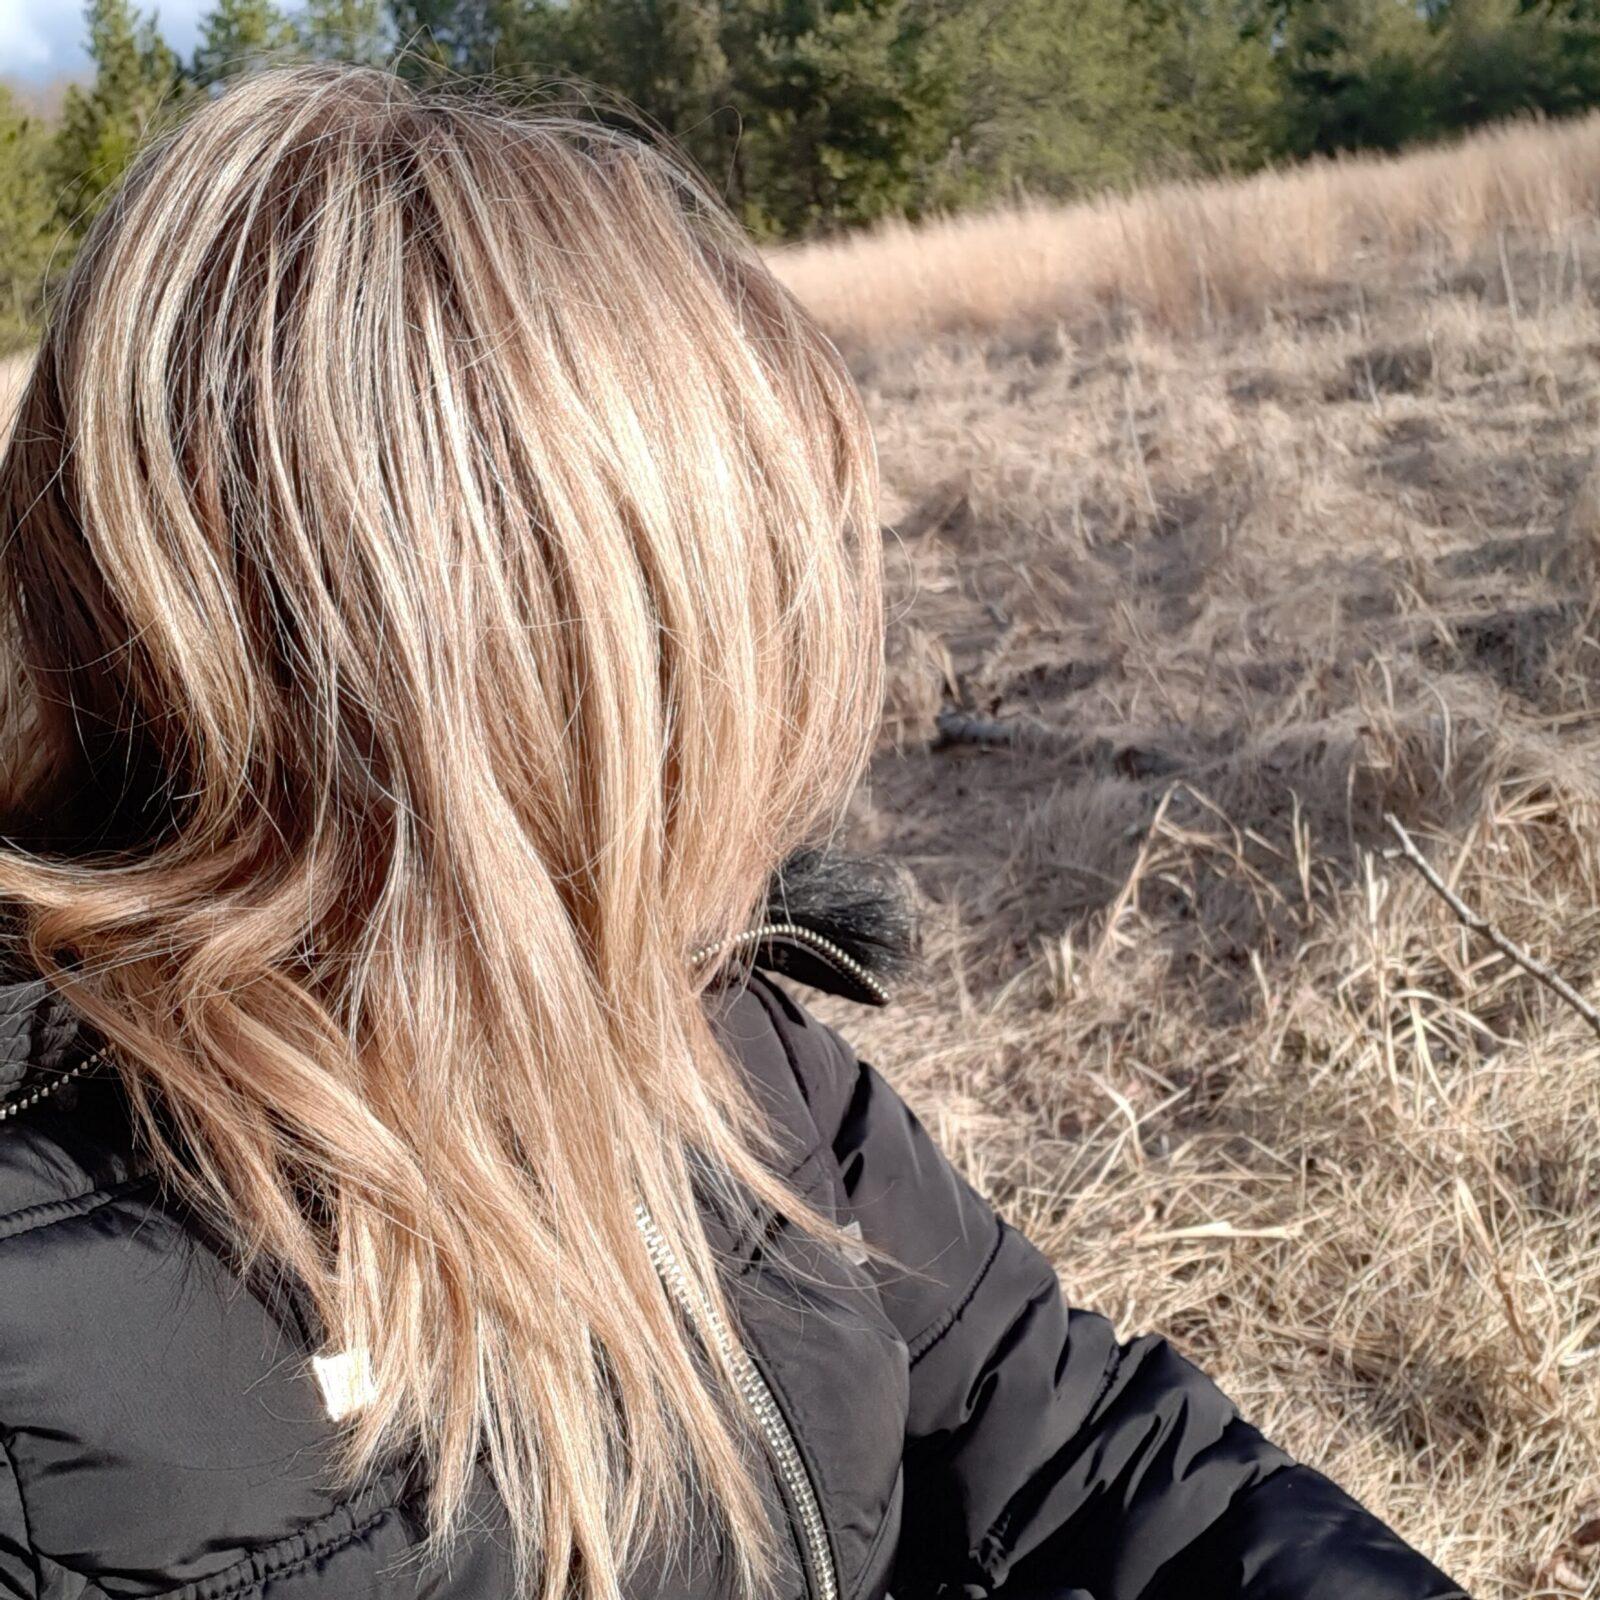 Erin's turned head with blond hair and blond looking grass in the background